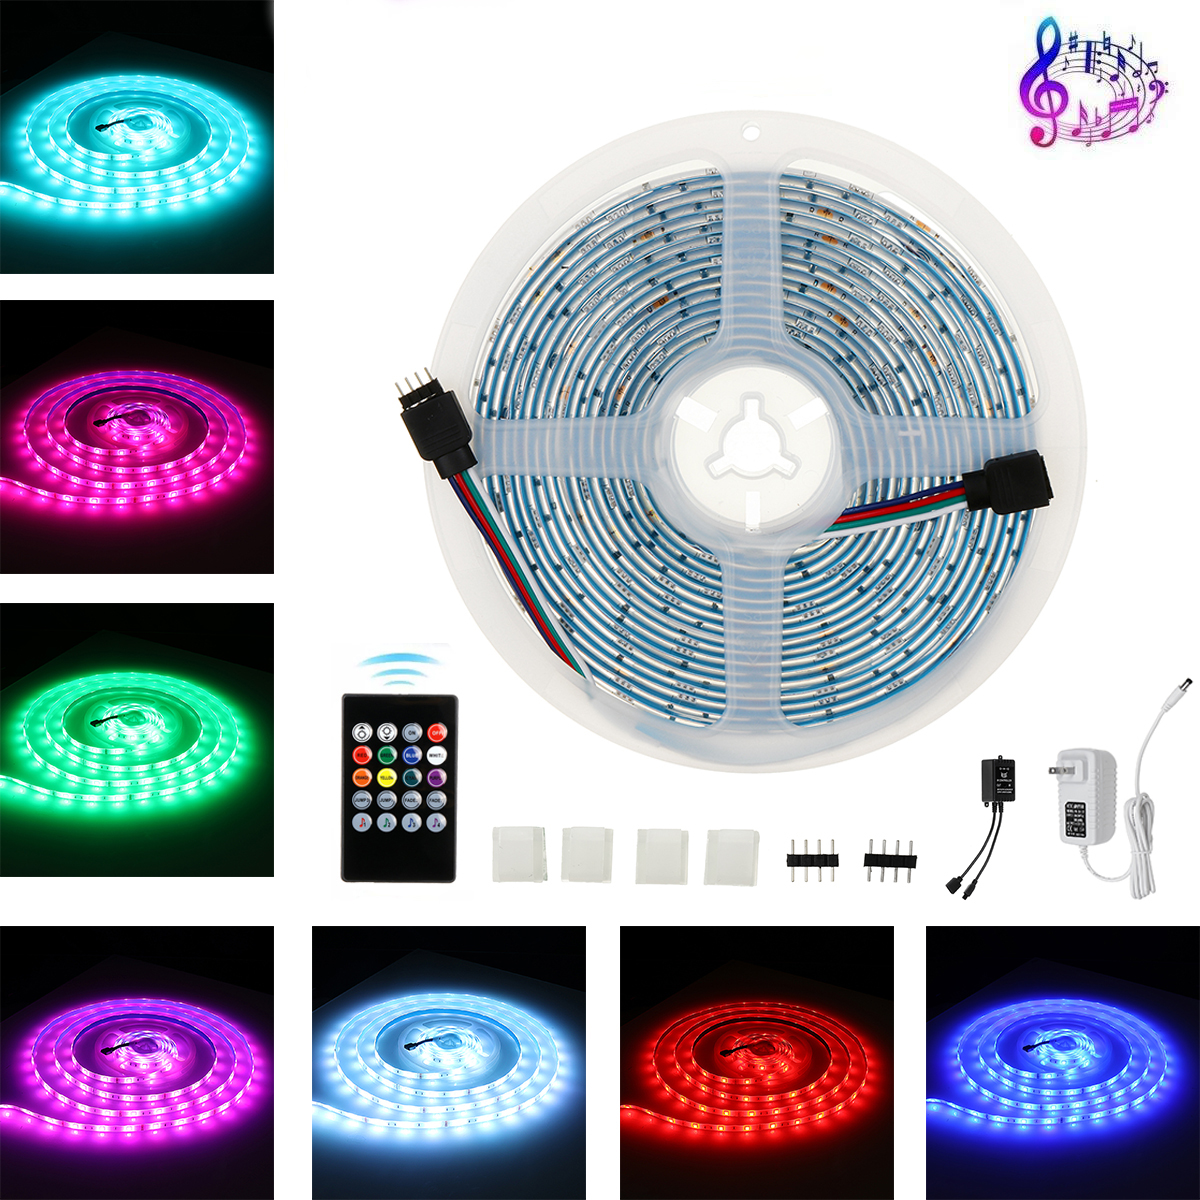 

5M DC12V 5050 Dimmable Music Control RGB LED Strip Light TV Backlighting+20Keys Remote Control for Home Decor